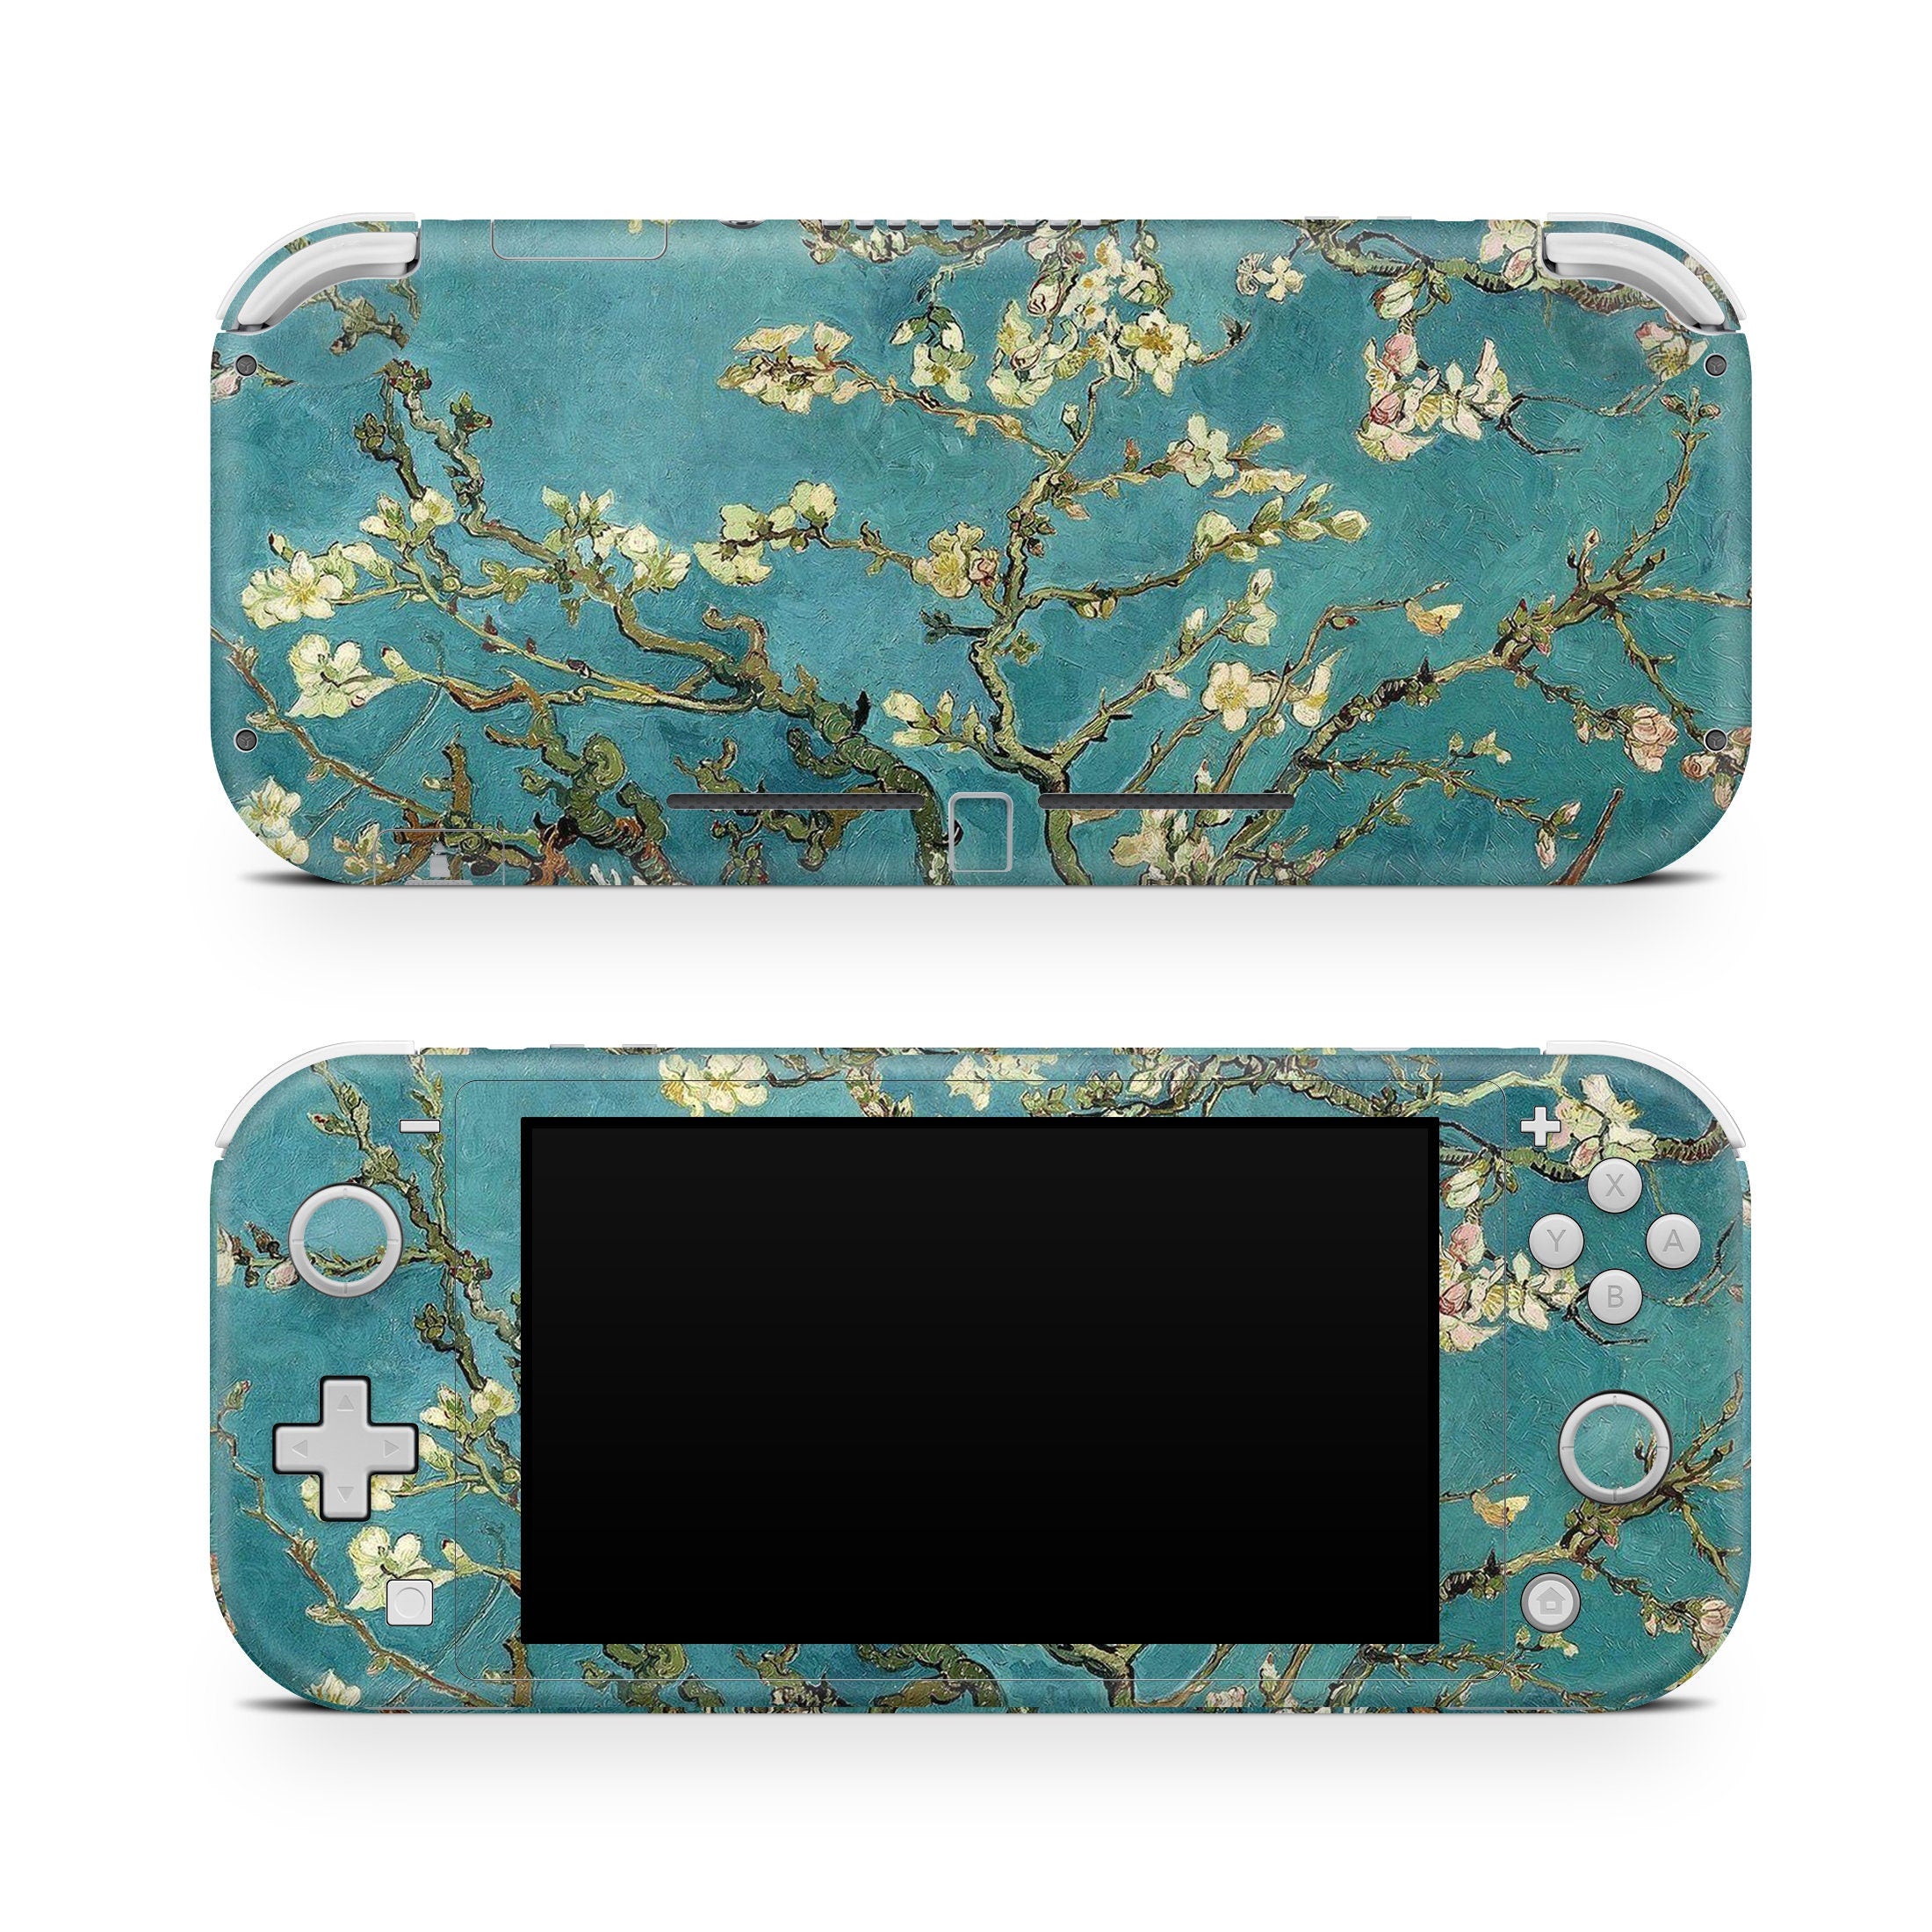 Nintendo switch Lite skin Almond Blossoms By Van Gogh, more color switch lite skin Full cover 3m